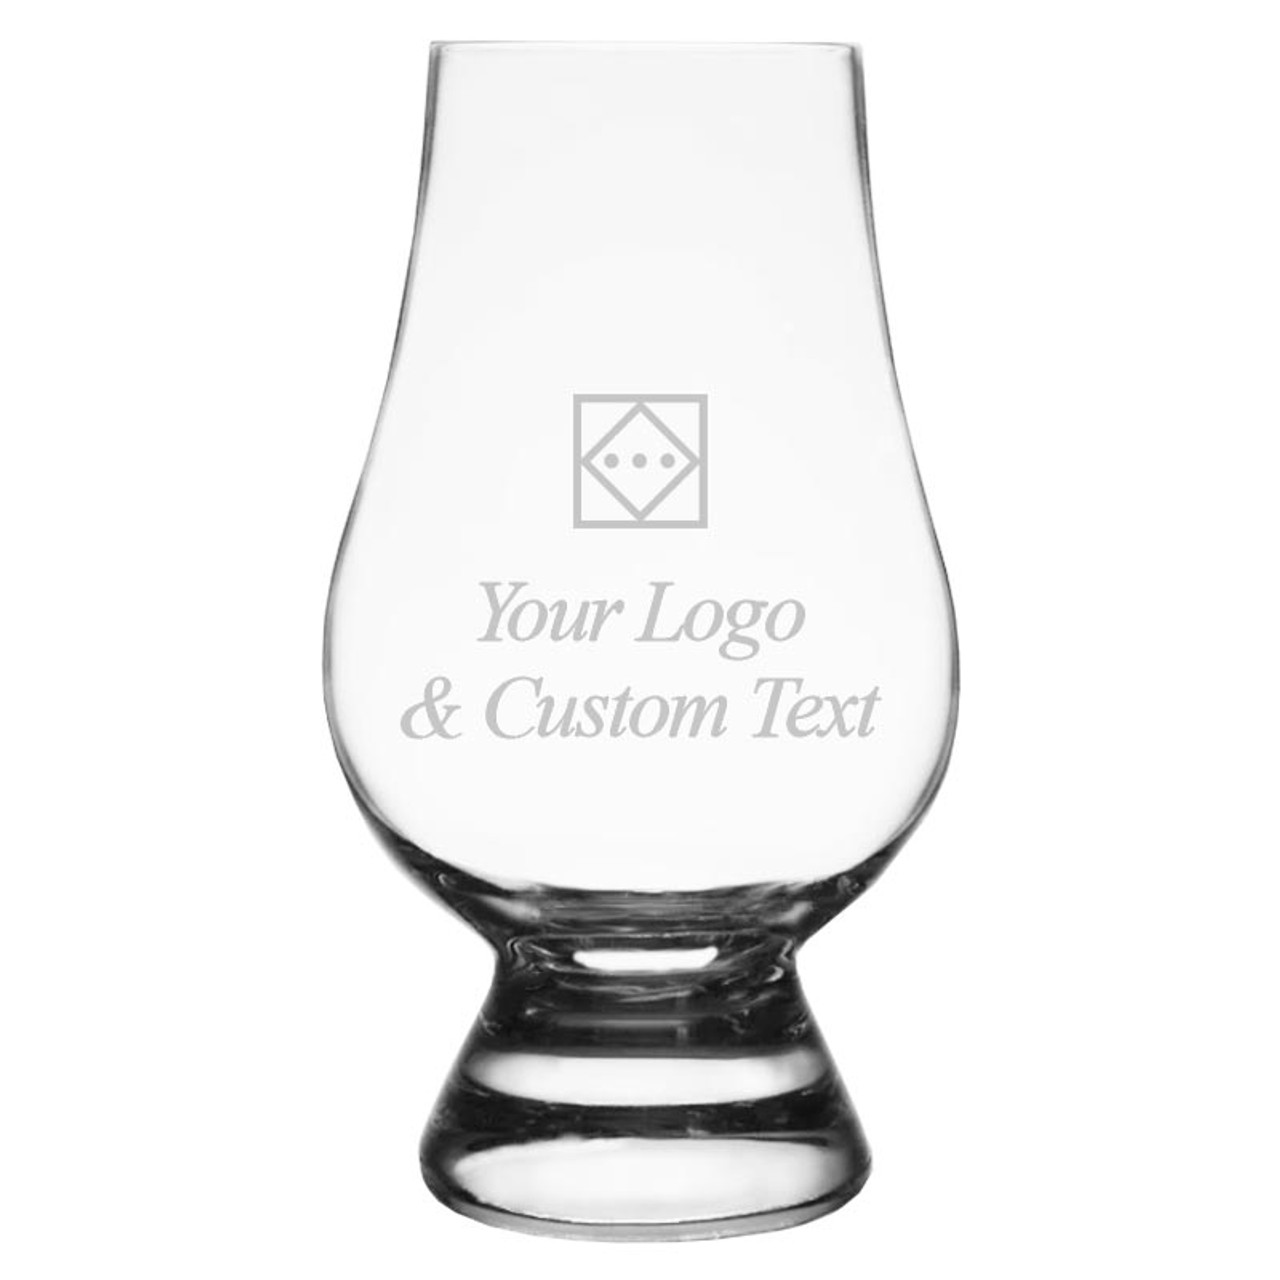 https://cdn11.bigcommerce.com/s-d22a0/images/stencil/1280x1280/products/2411/11096/personalized-glencairn-glasses-custom-text-logo__44126.1592247317.jpg?c=2